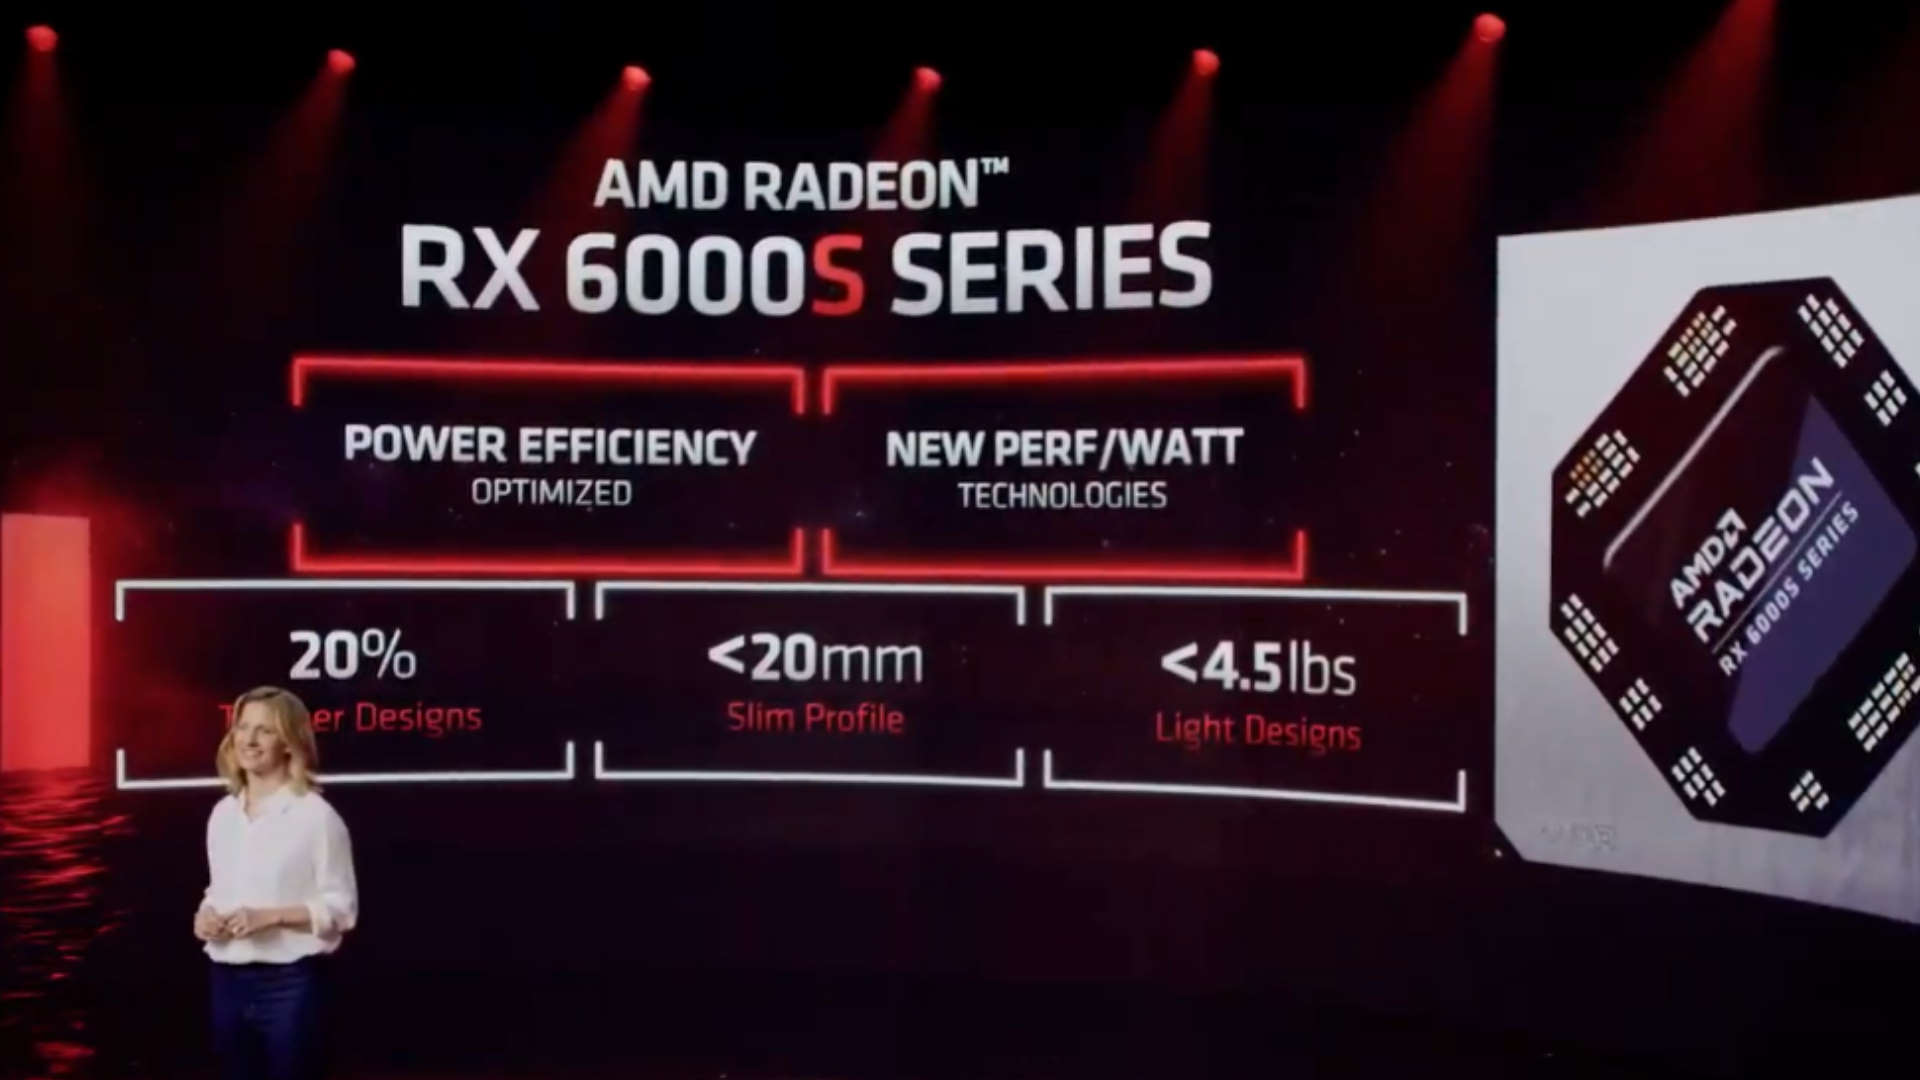 AMD's Laura Smith talking about the new RX 6000 series mobile GPUs